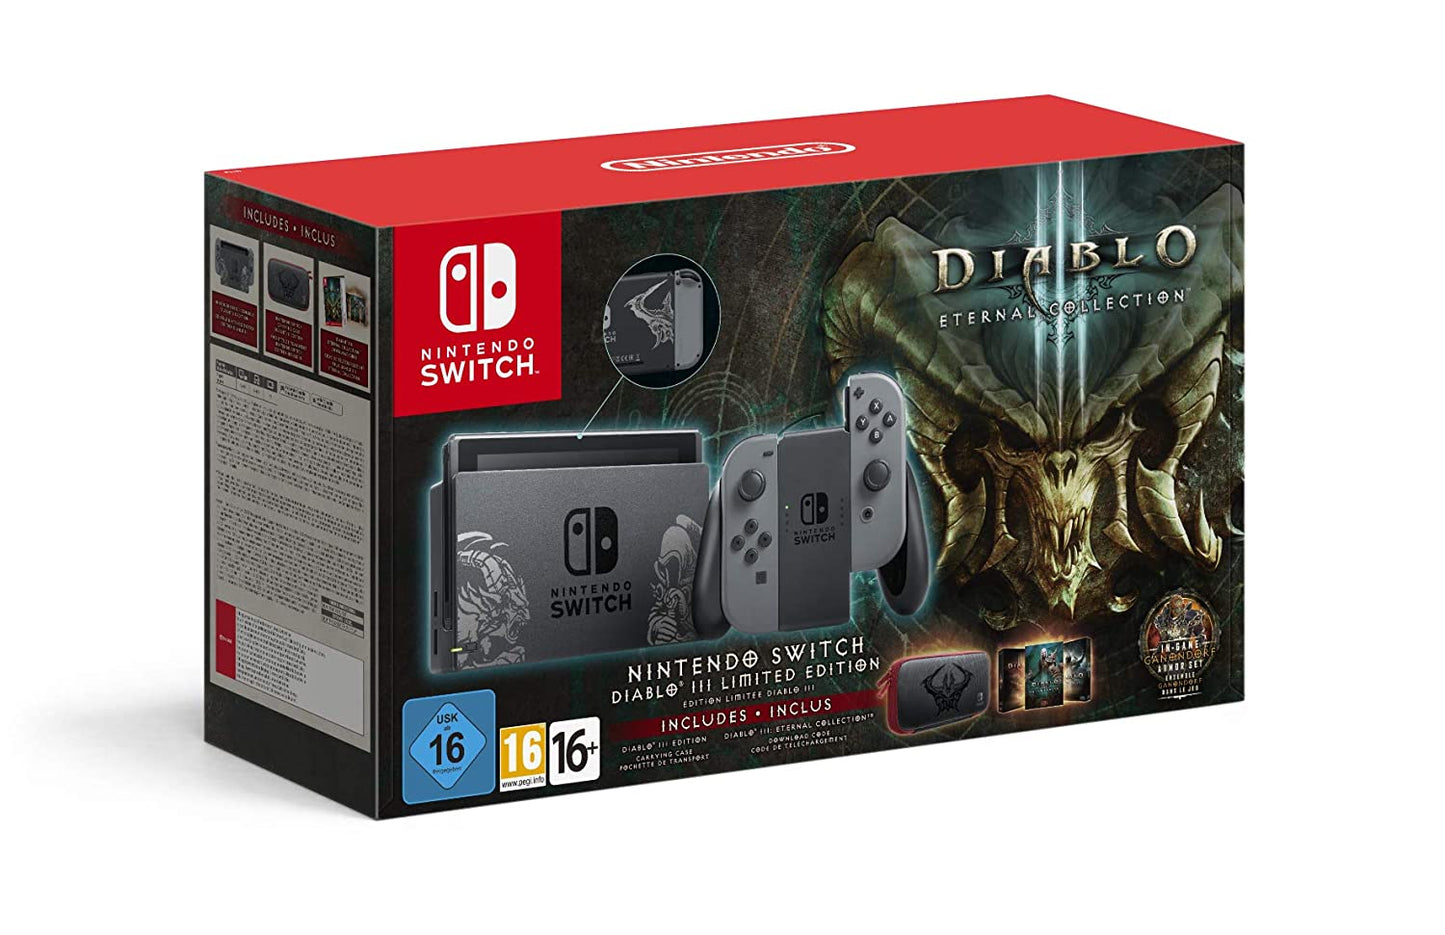 Nintendo Switch Diablo III Limited Edition Console with Diablo III Download Code + Themed Carry Case (Discontinued)